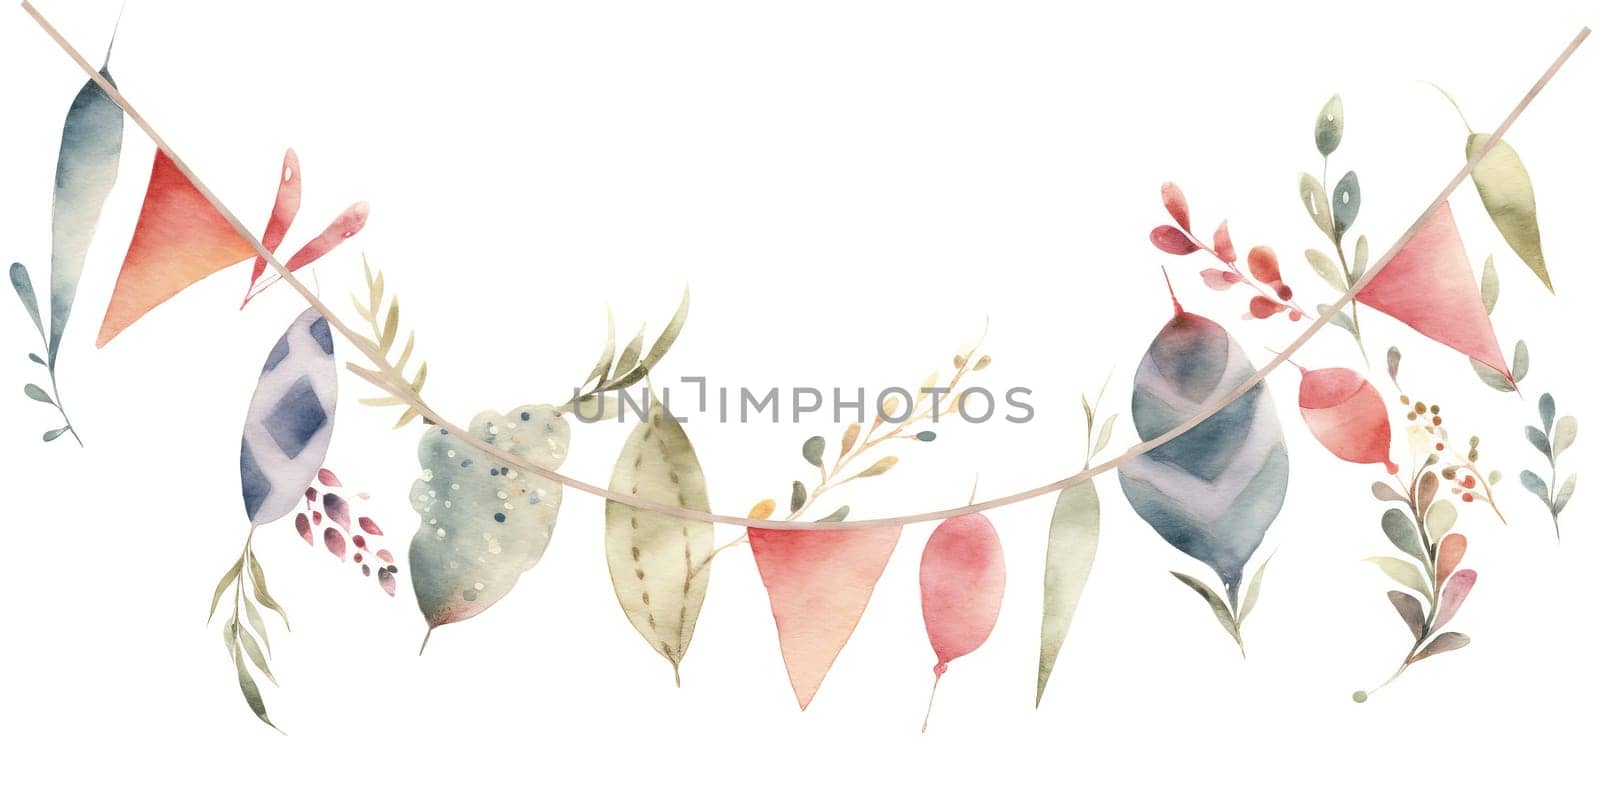 Watercolor Illustration Of Colorful Paper Garlands On A Rope, Isolated On A White Background